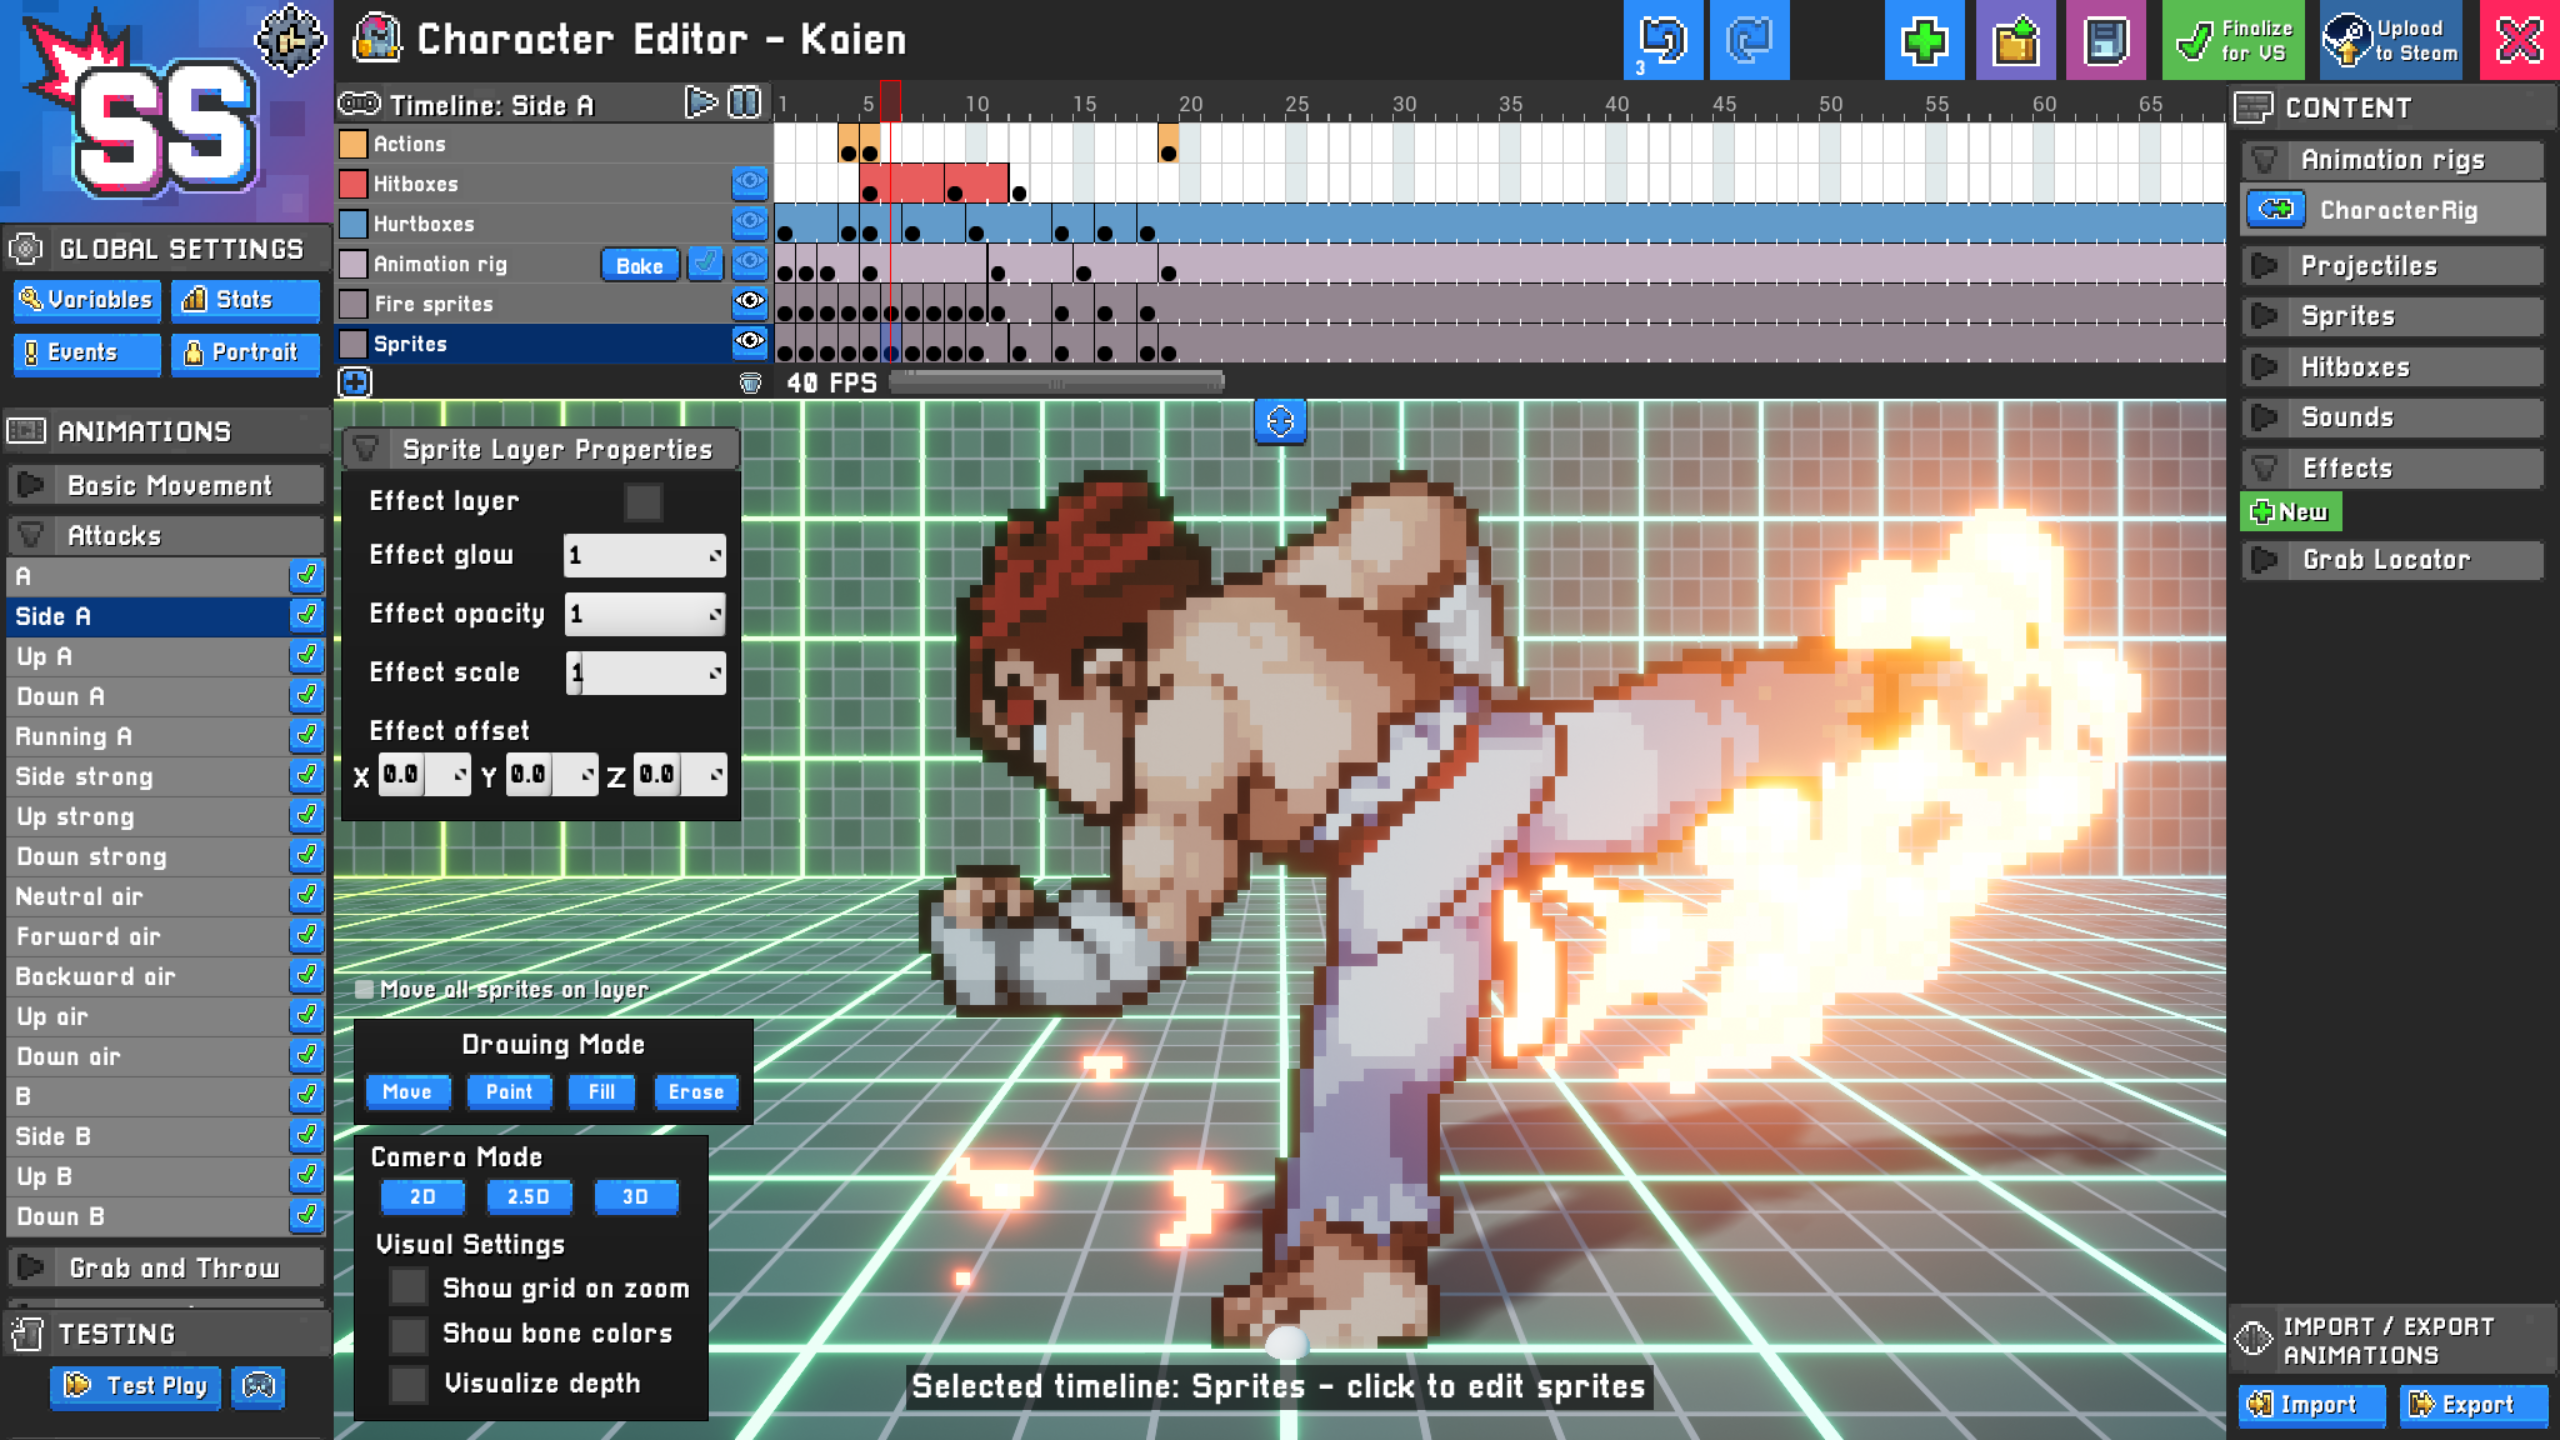 Editing effects in the Character Editor.